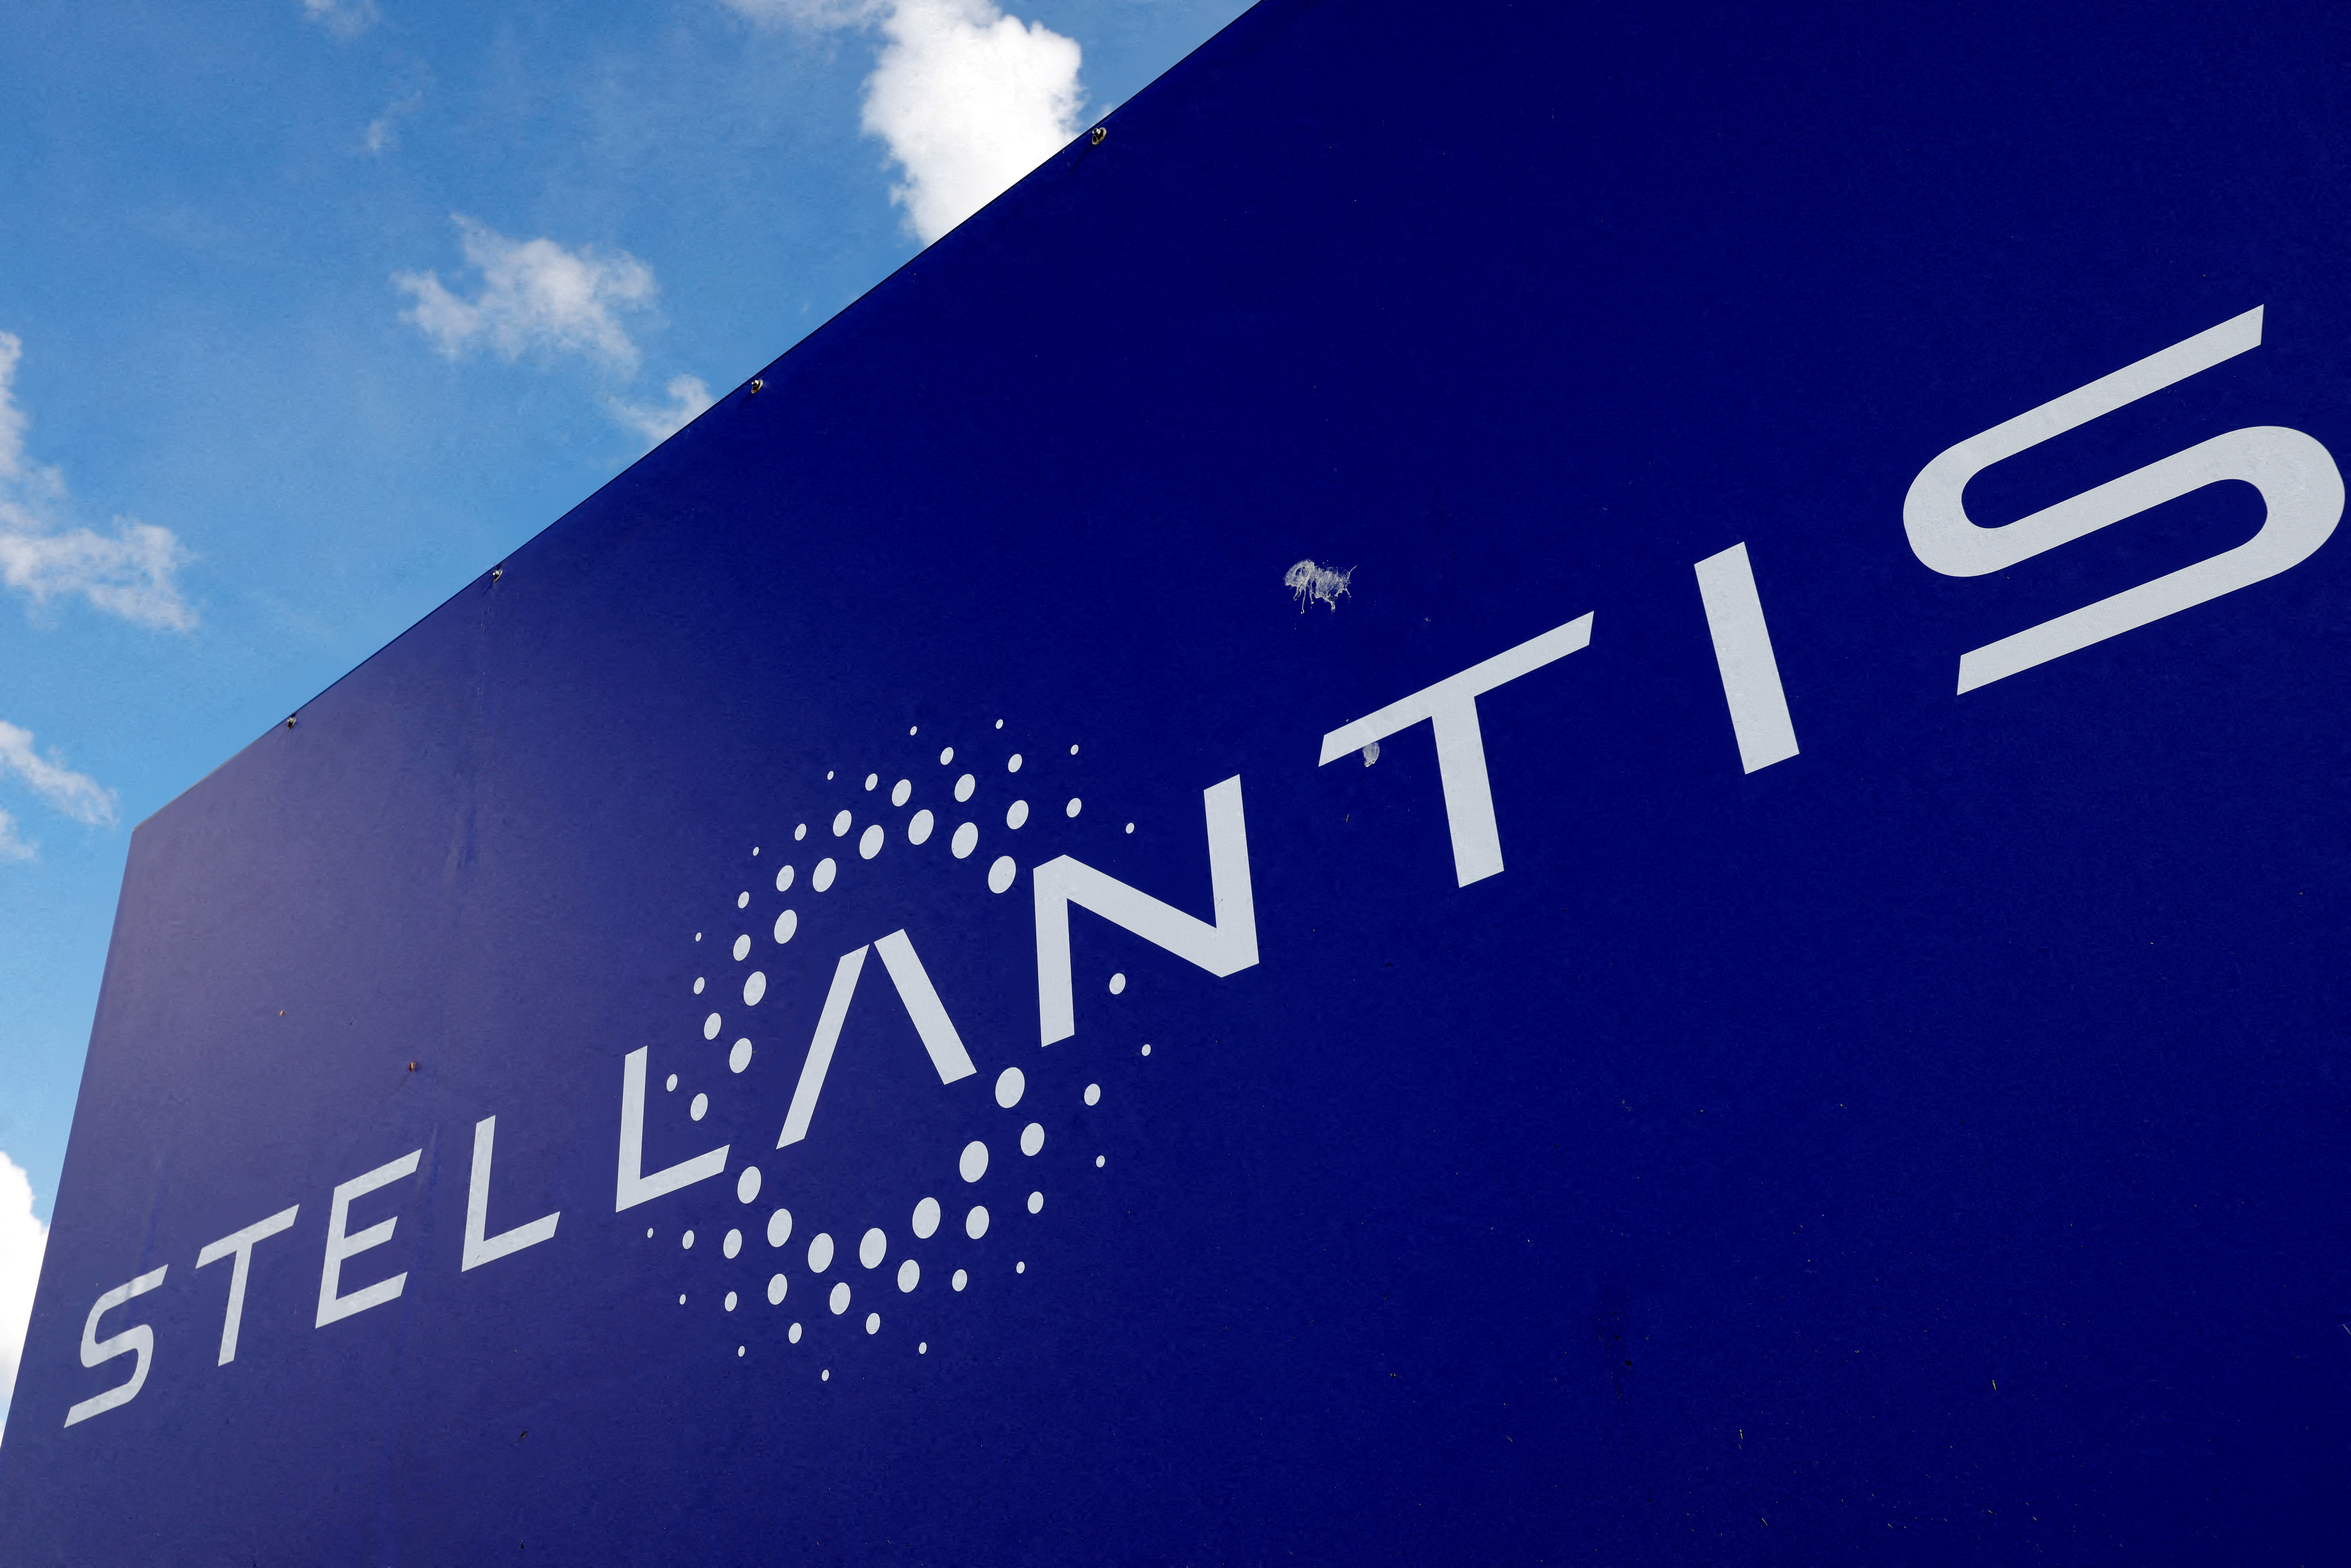 The logo of Stellantis is seen in this image provided on November 9, 2020.